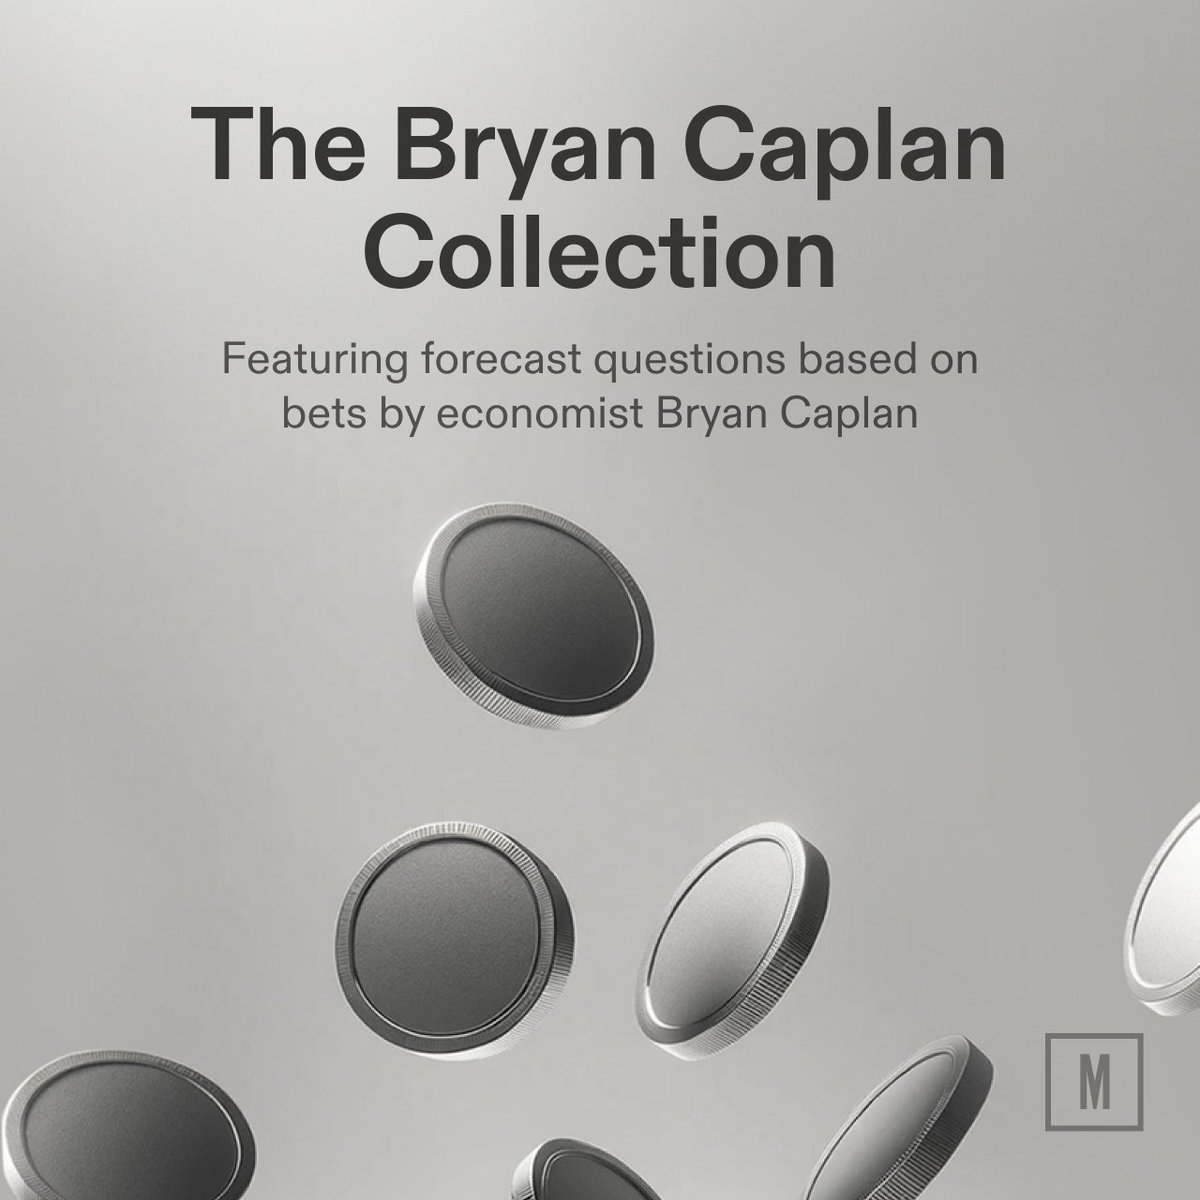 Economist @bryan_caplan has won all his public bets—a nearly two-decade winning streak. Now you can predict the outcomes of his bets on AI-supercharged growth, climate change, civil wars, and more in our new Bryan Caplan Collection. Get started: metaculus.com/project/caplan/